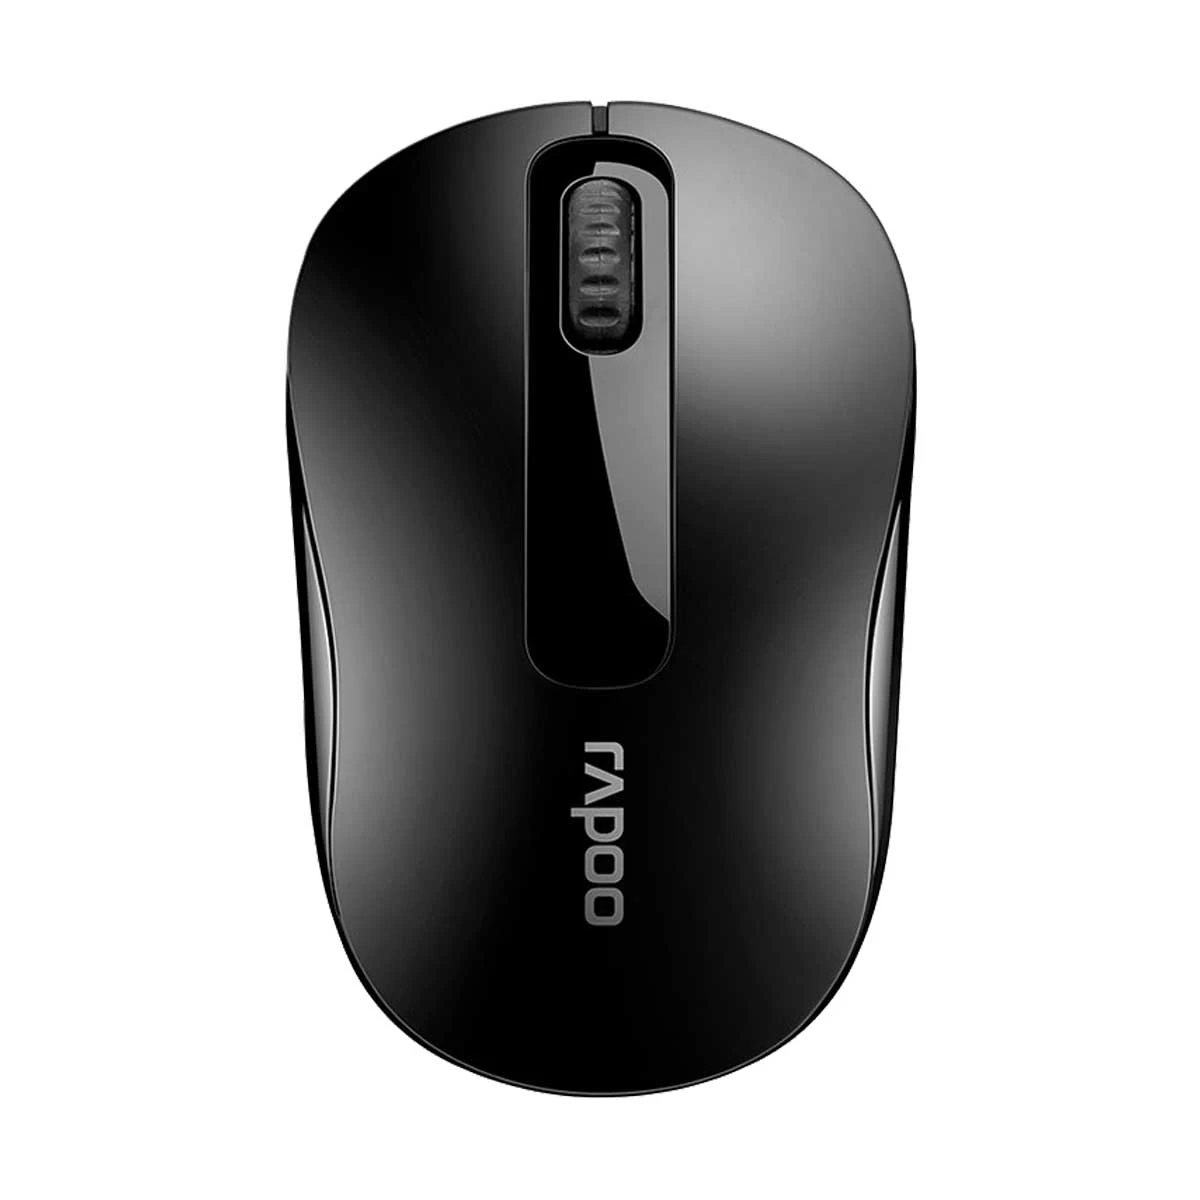 Mouse Rapoo M10 | Price Plus RAYNS in Black BD, Wireless